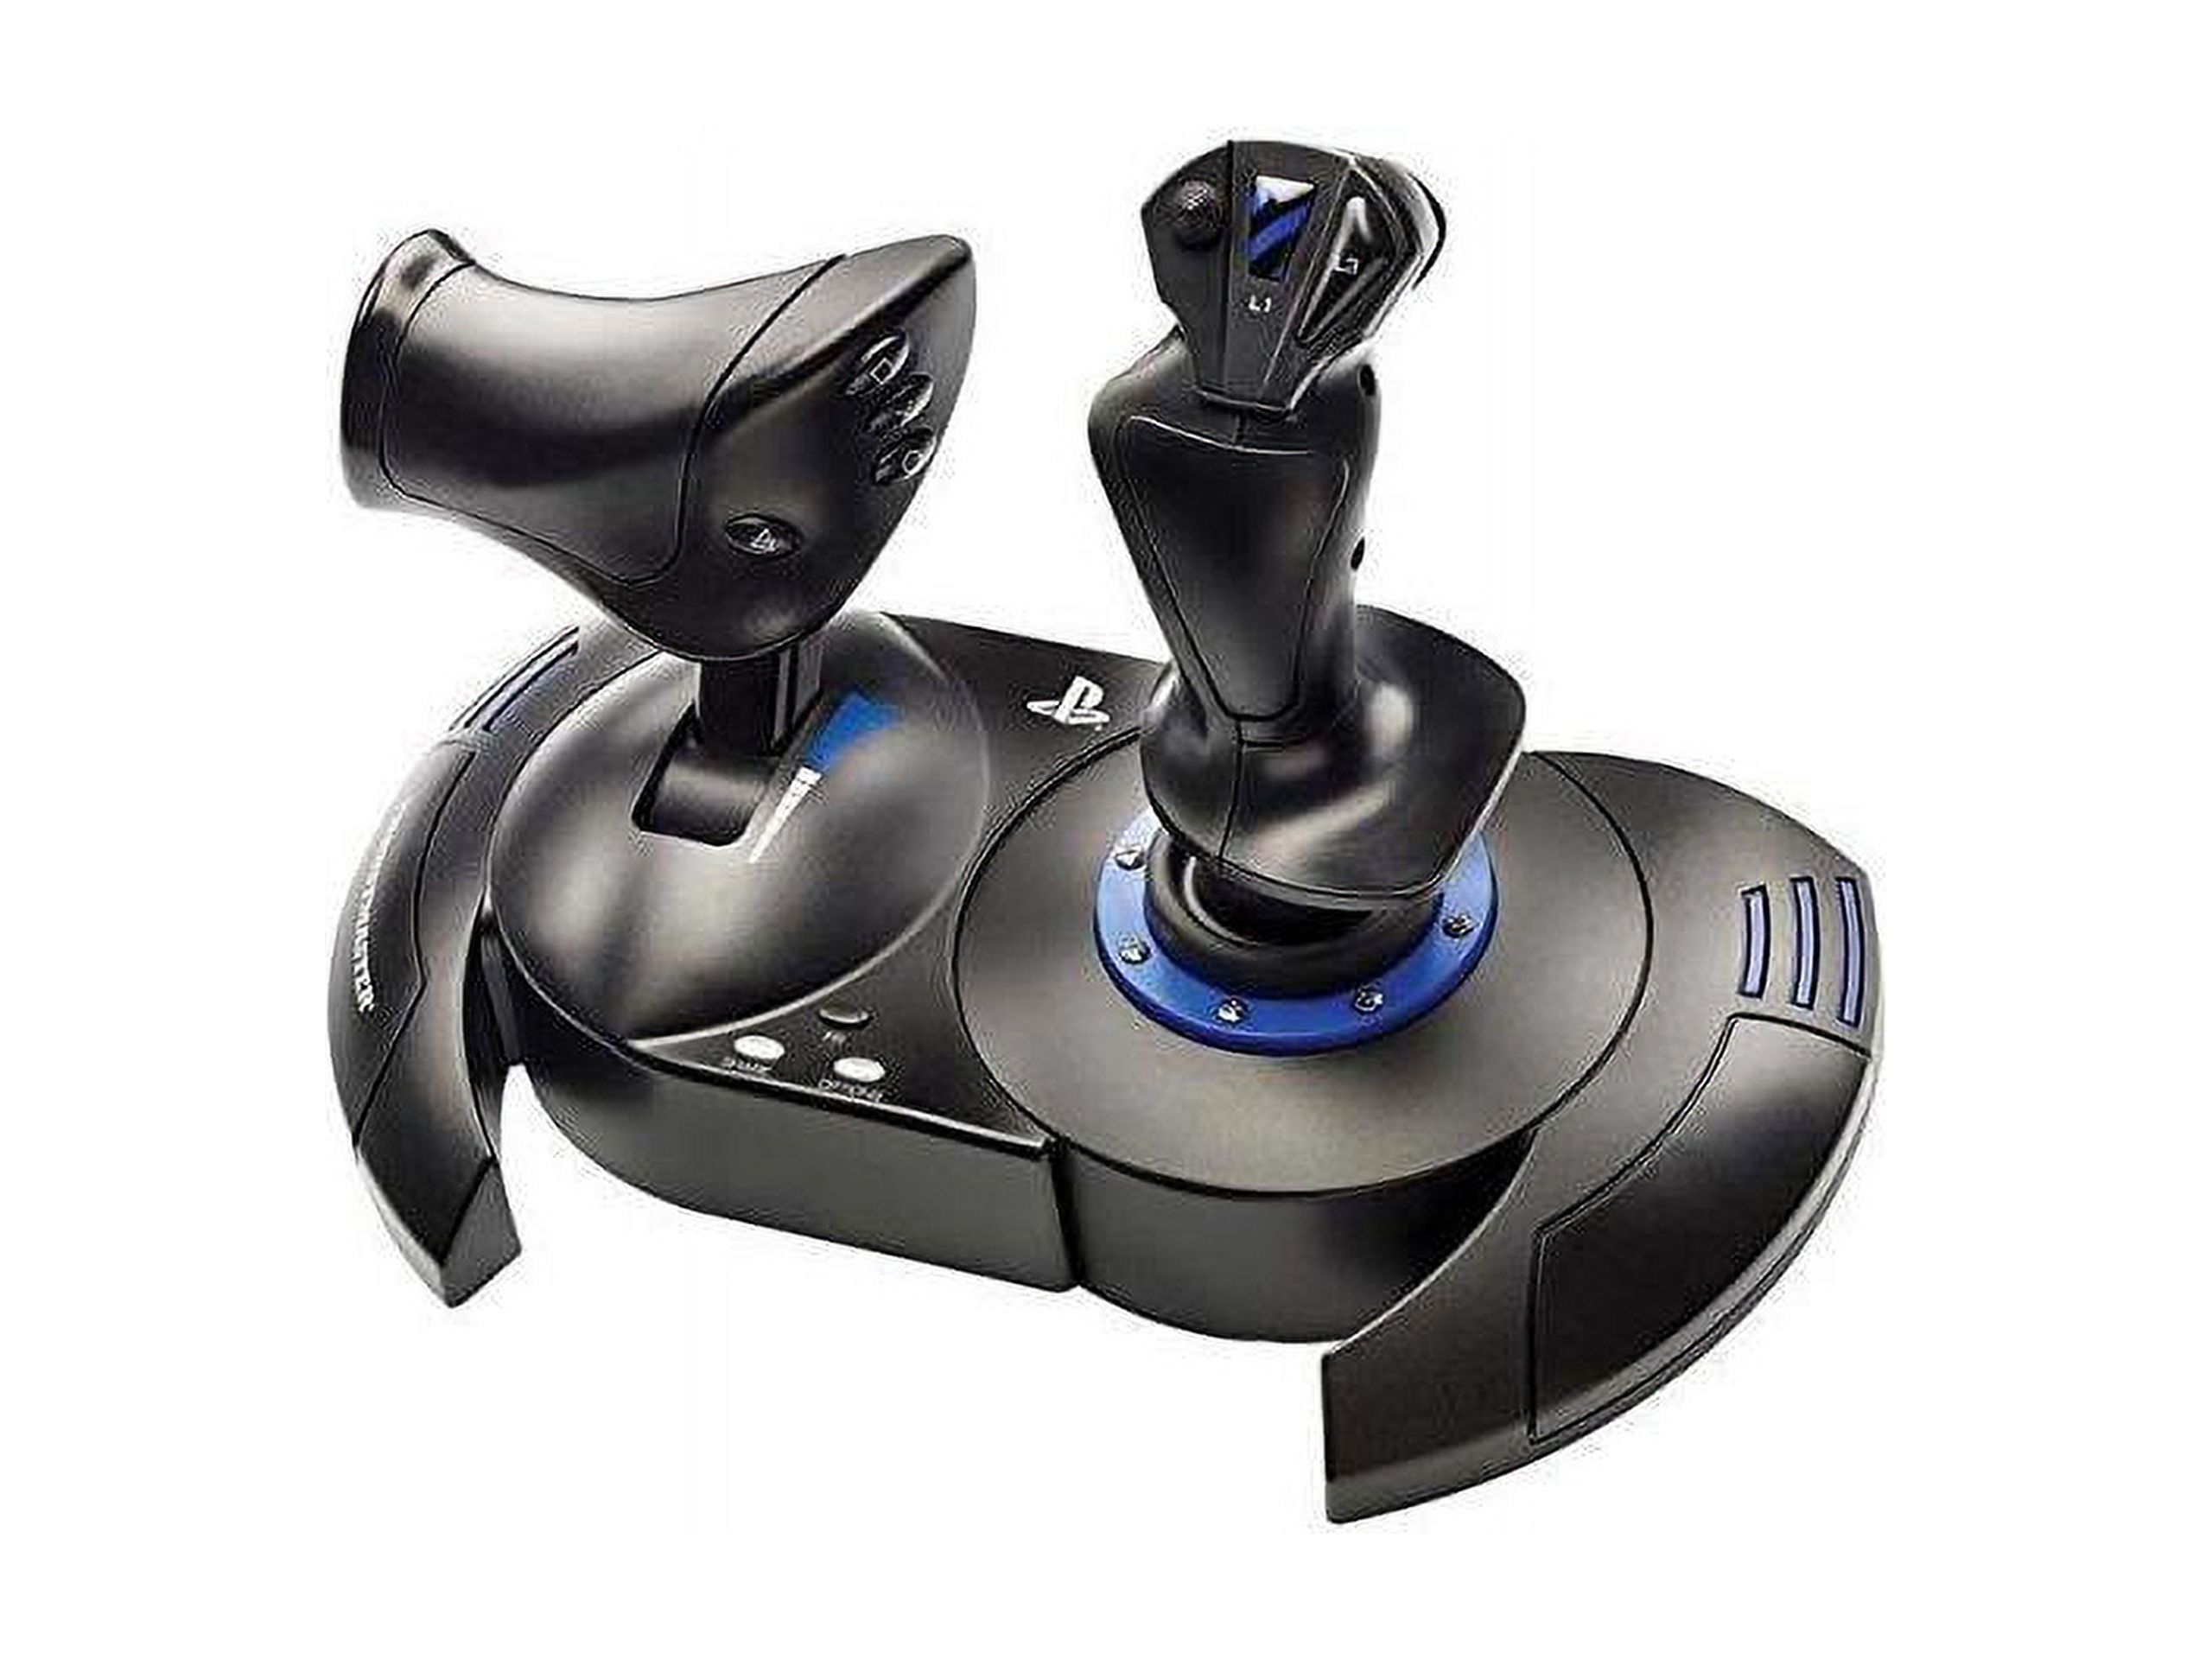 Thrustmaster T-Flight Hotas 4 - Joystick and Throttle - Wired - for Sony PlayStation 4 - image 1 of 14